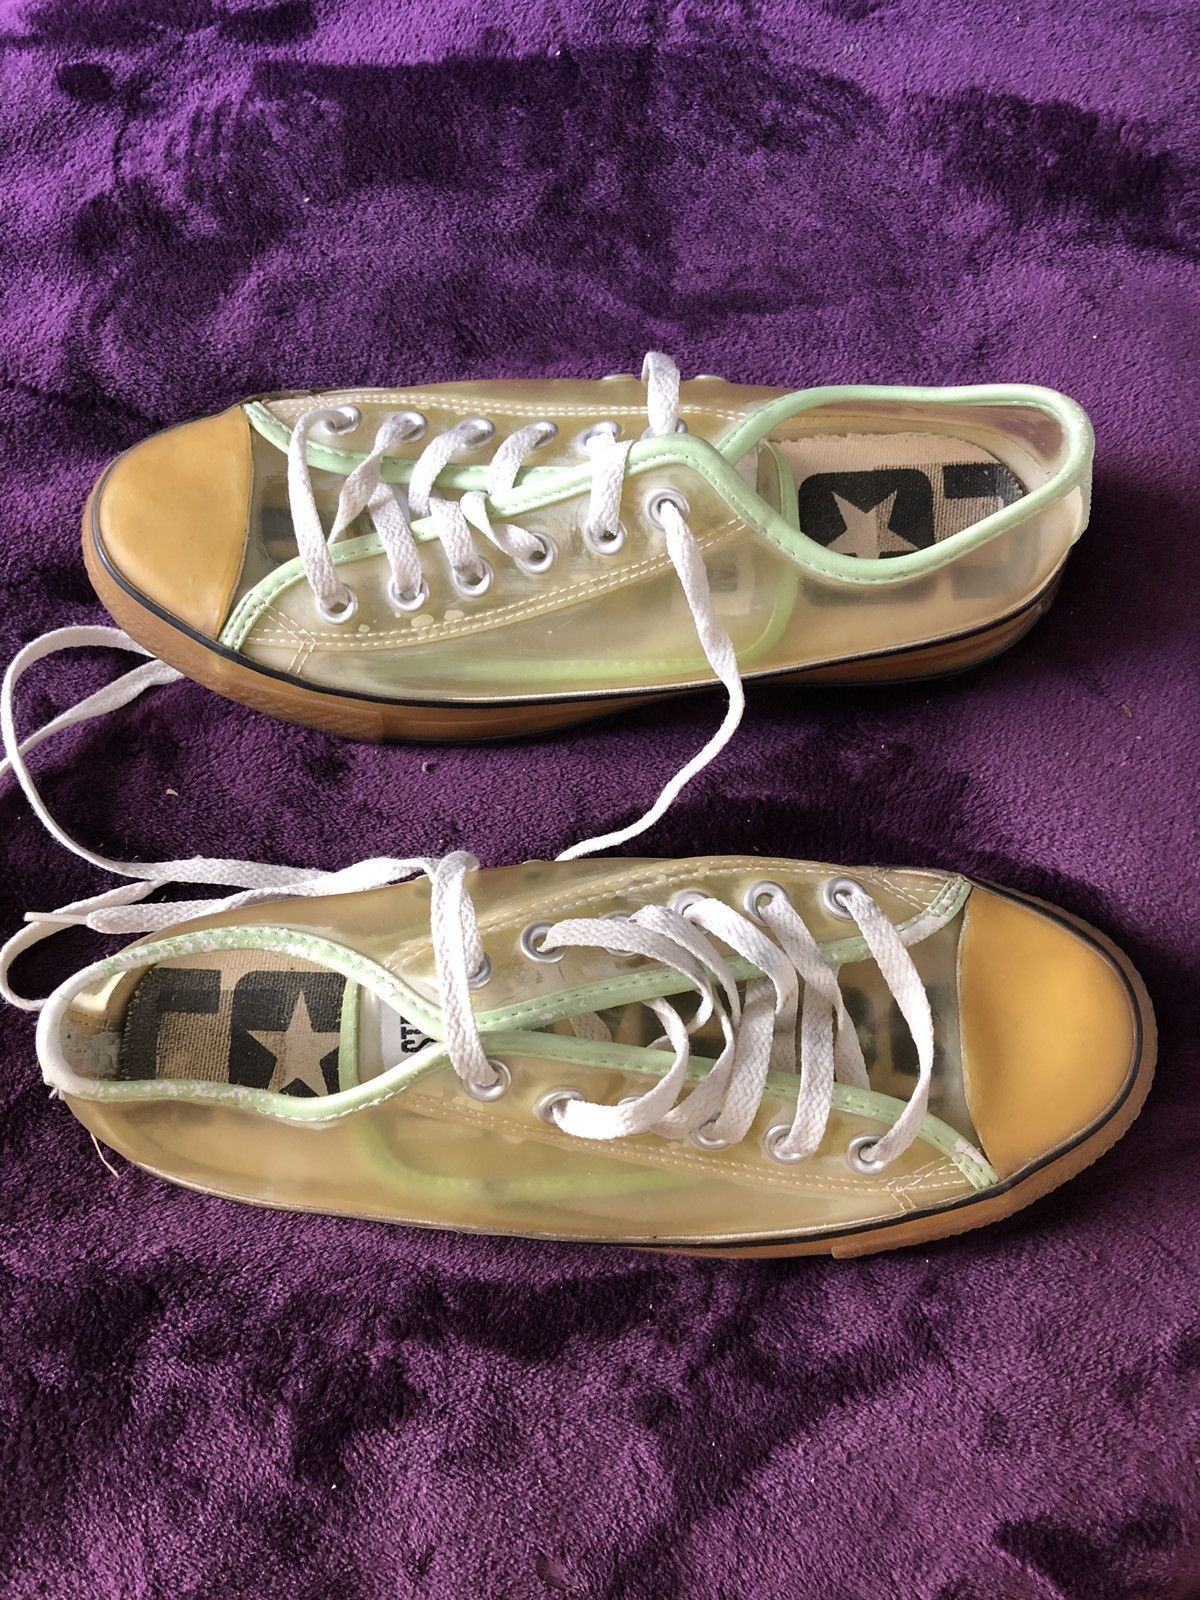 Converse Transparent Glow In The Dark 70s Size US 7 / EU 40 - 2 Preview